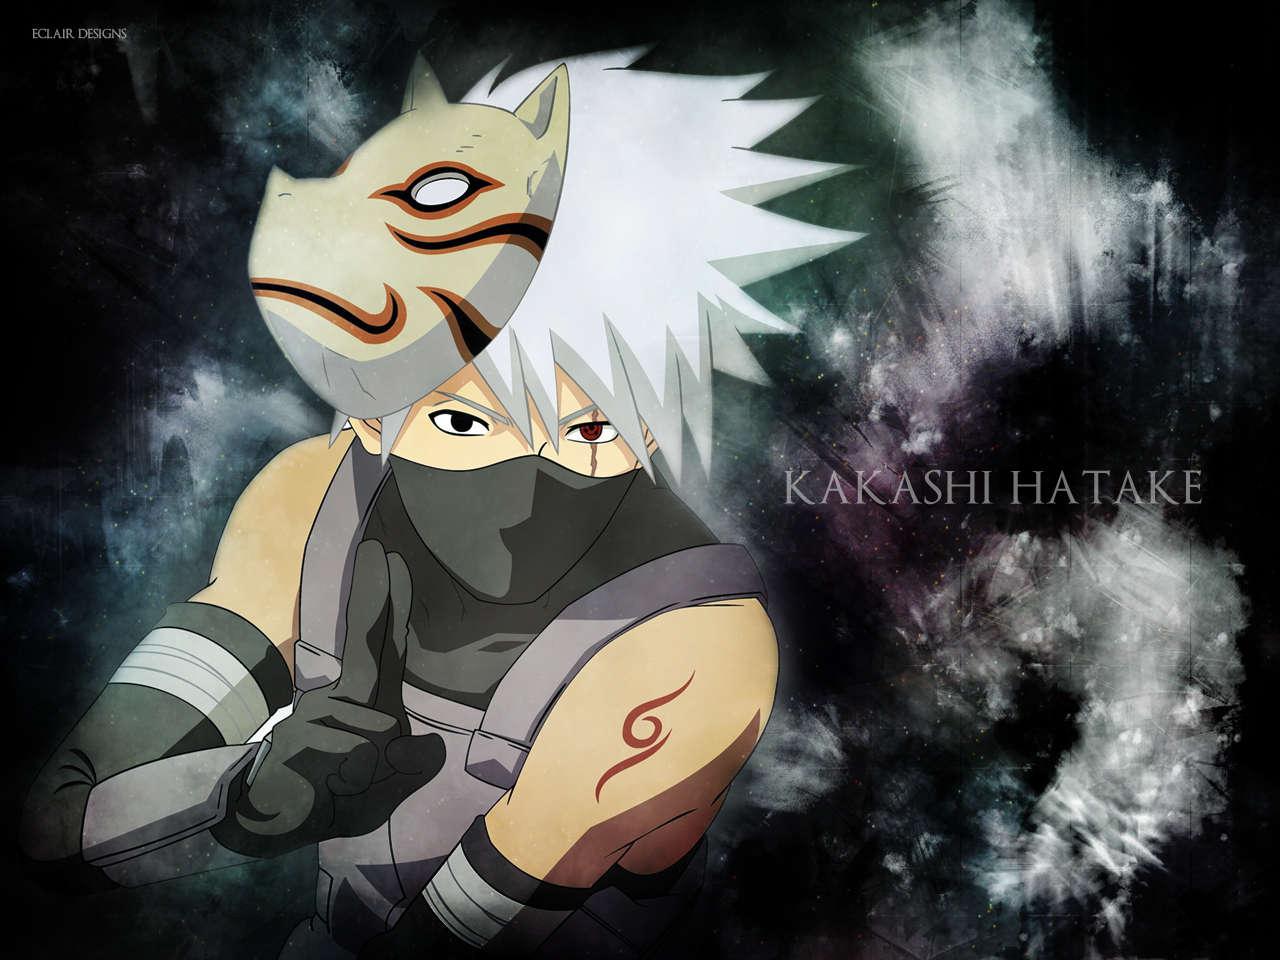 Featured image of post Cool Kakashi Wallpapers Hd : Kakashi hatake, sharingan, 4k, #15 uhd ultra hd wallpaper for desktop, pc, laptop, iphone, android phone, smartphone, imac, macbook, tablet select and download your desired screen size from its original uhd 3840x2160 resolution to different high definition resolution or hd mobile.